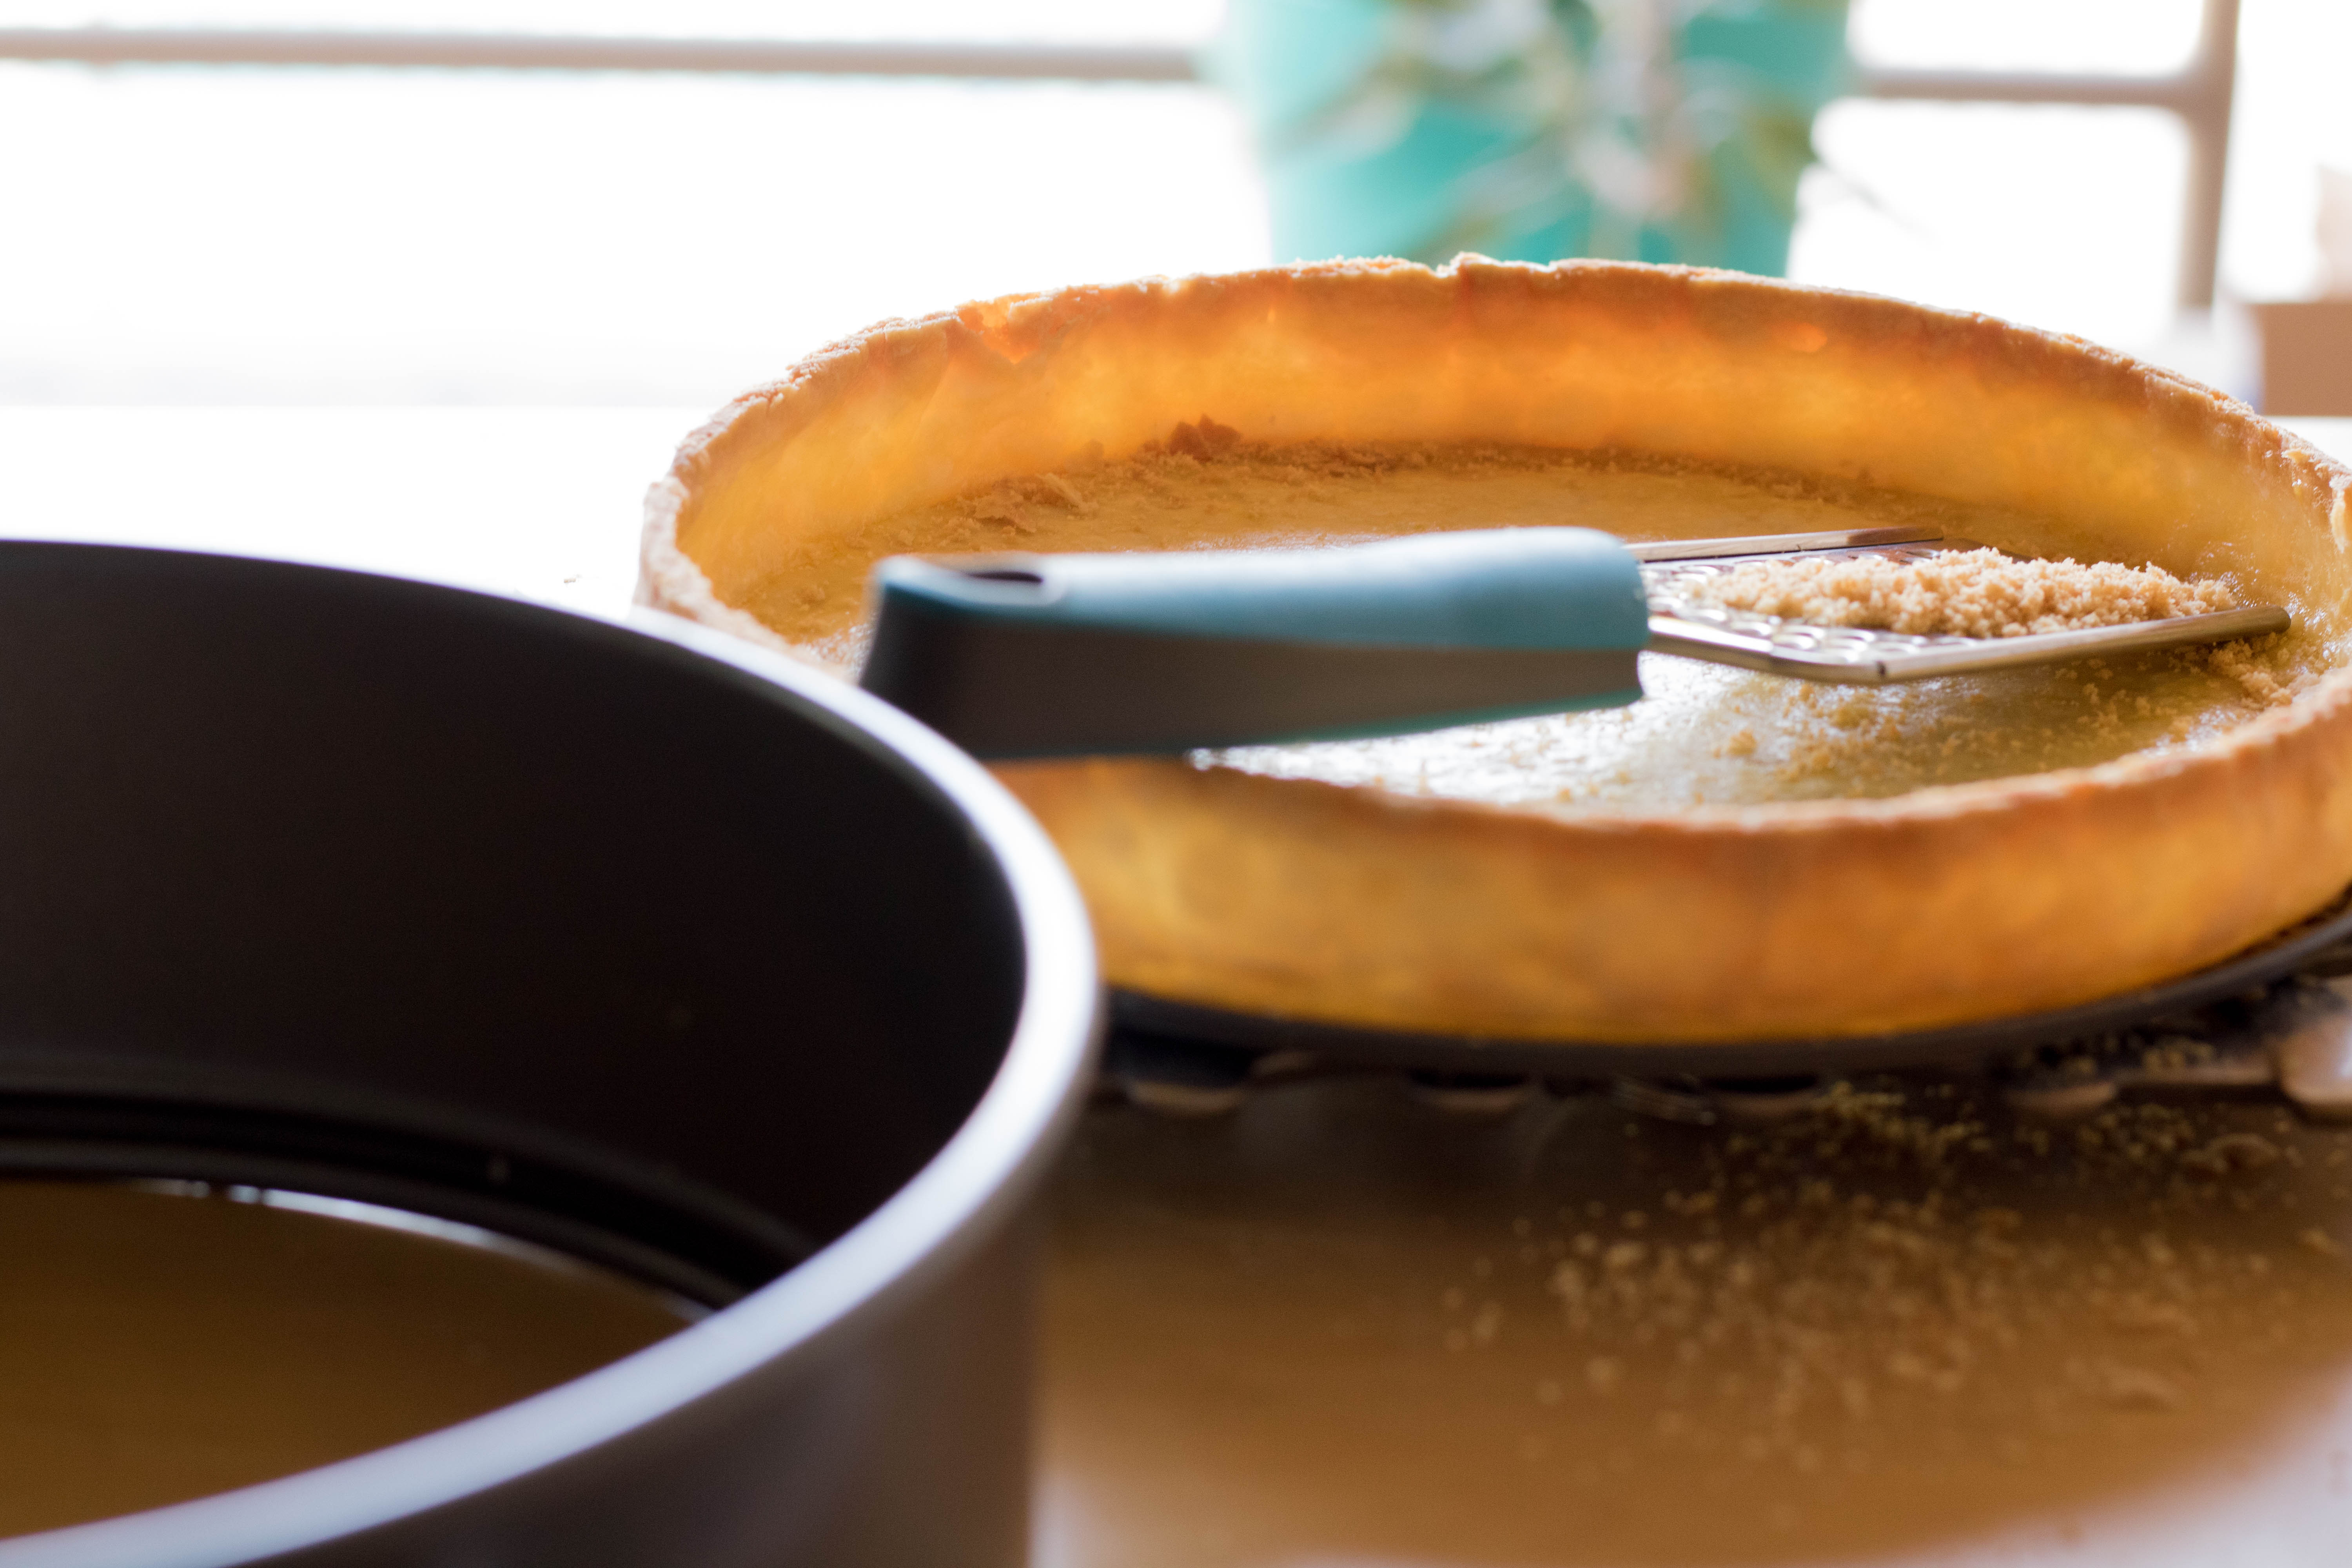 pre baked crust for your tarts and pies this thanksgiving season